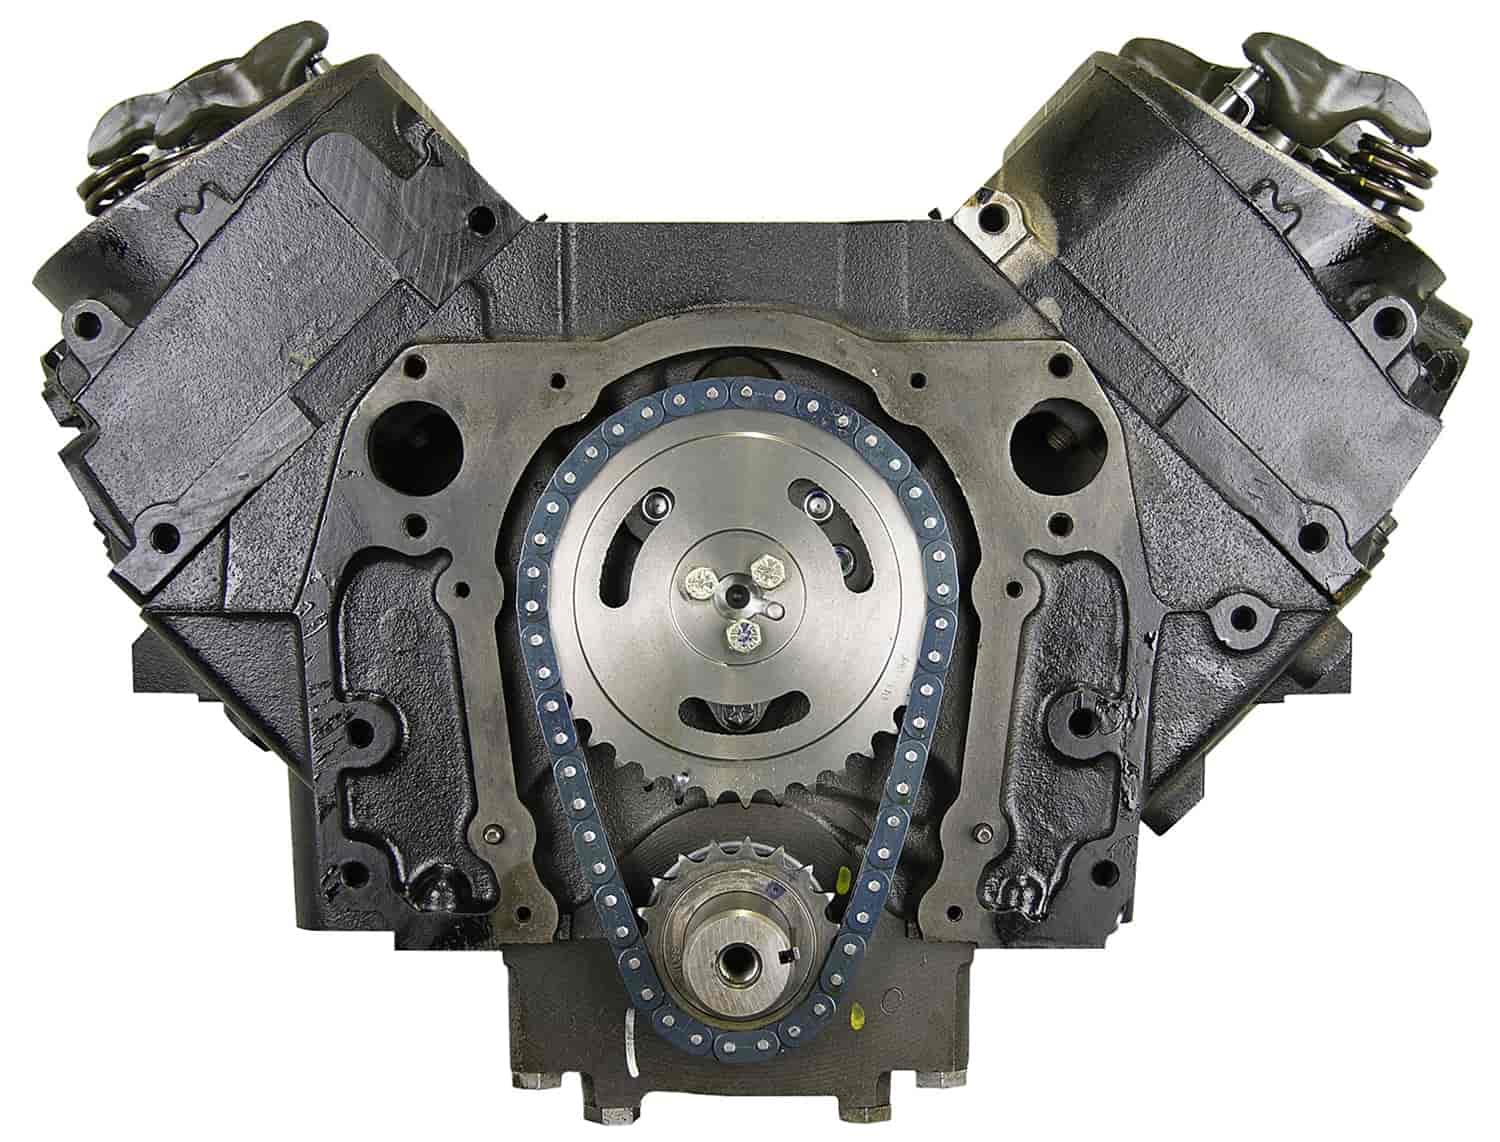 Remanufactured Crate Engine for Marine Applications with 1996-2003 Big Block Chevy 454ci/7.4L